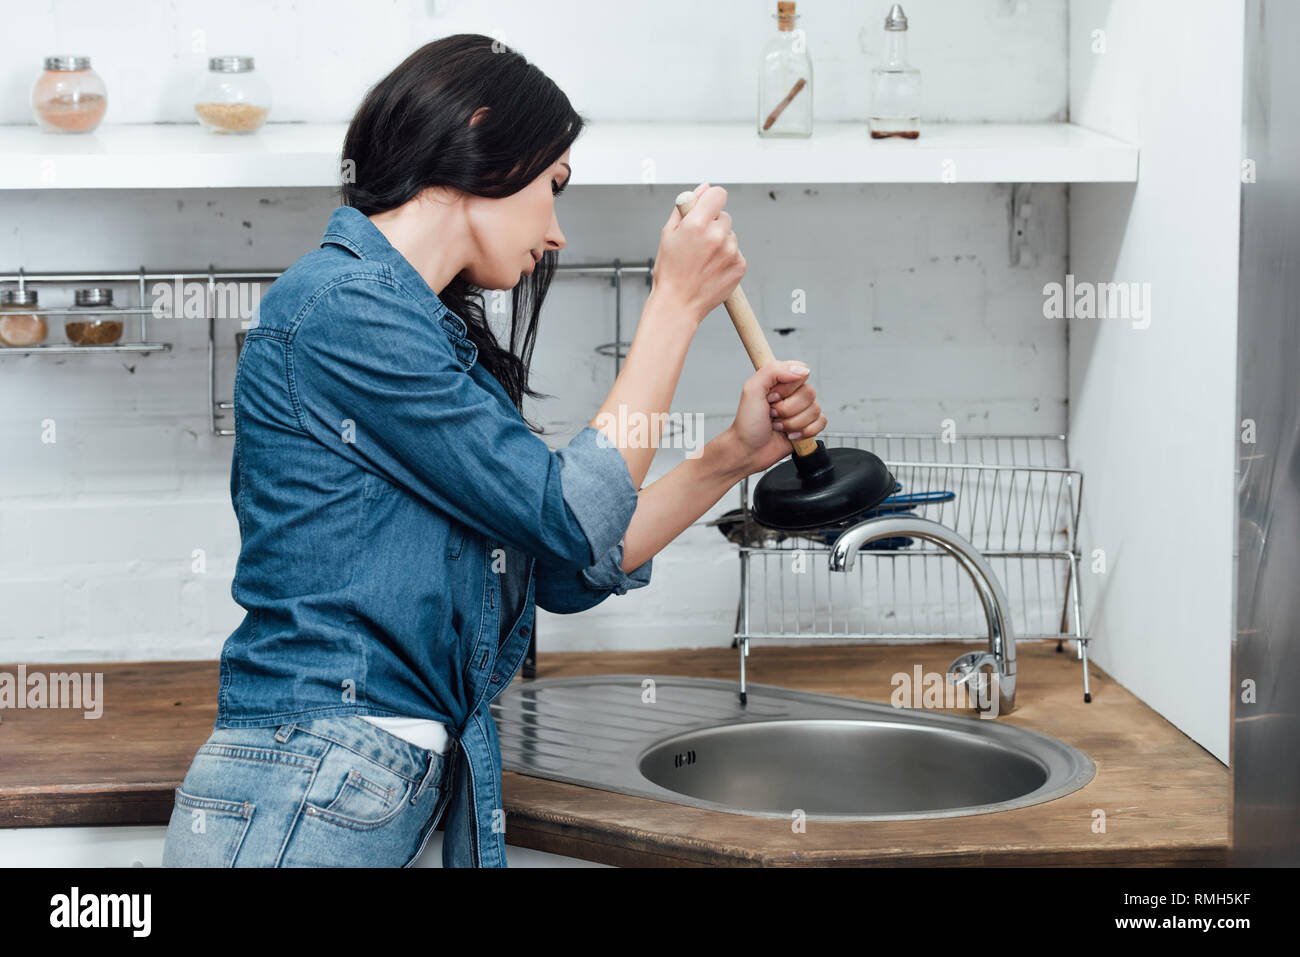 Overflowing Kitchen Sink, Clogged Drain. Hand Holding Plunger. Stock Photo  - Image of homemaker, home: 208234932